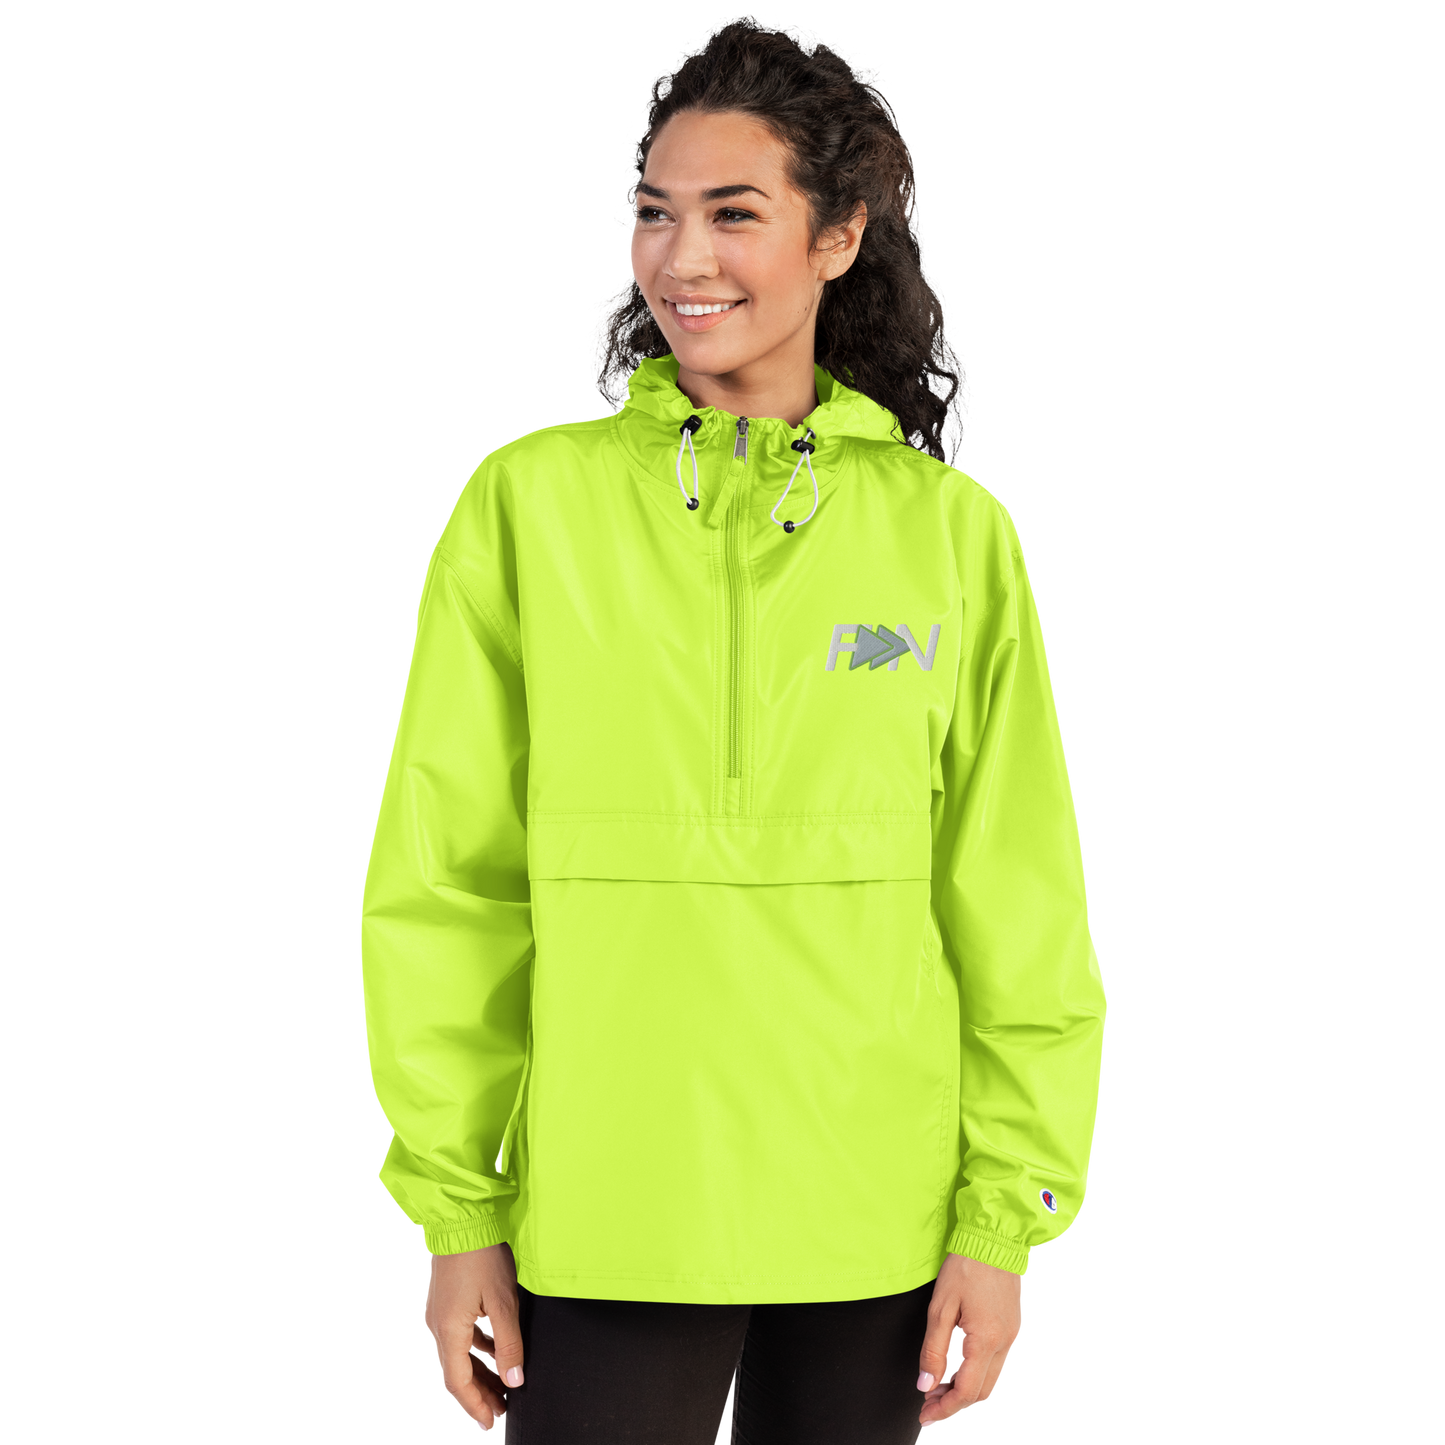 Forward Notion's Yankover Packable Jacket in Safety Green